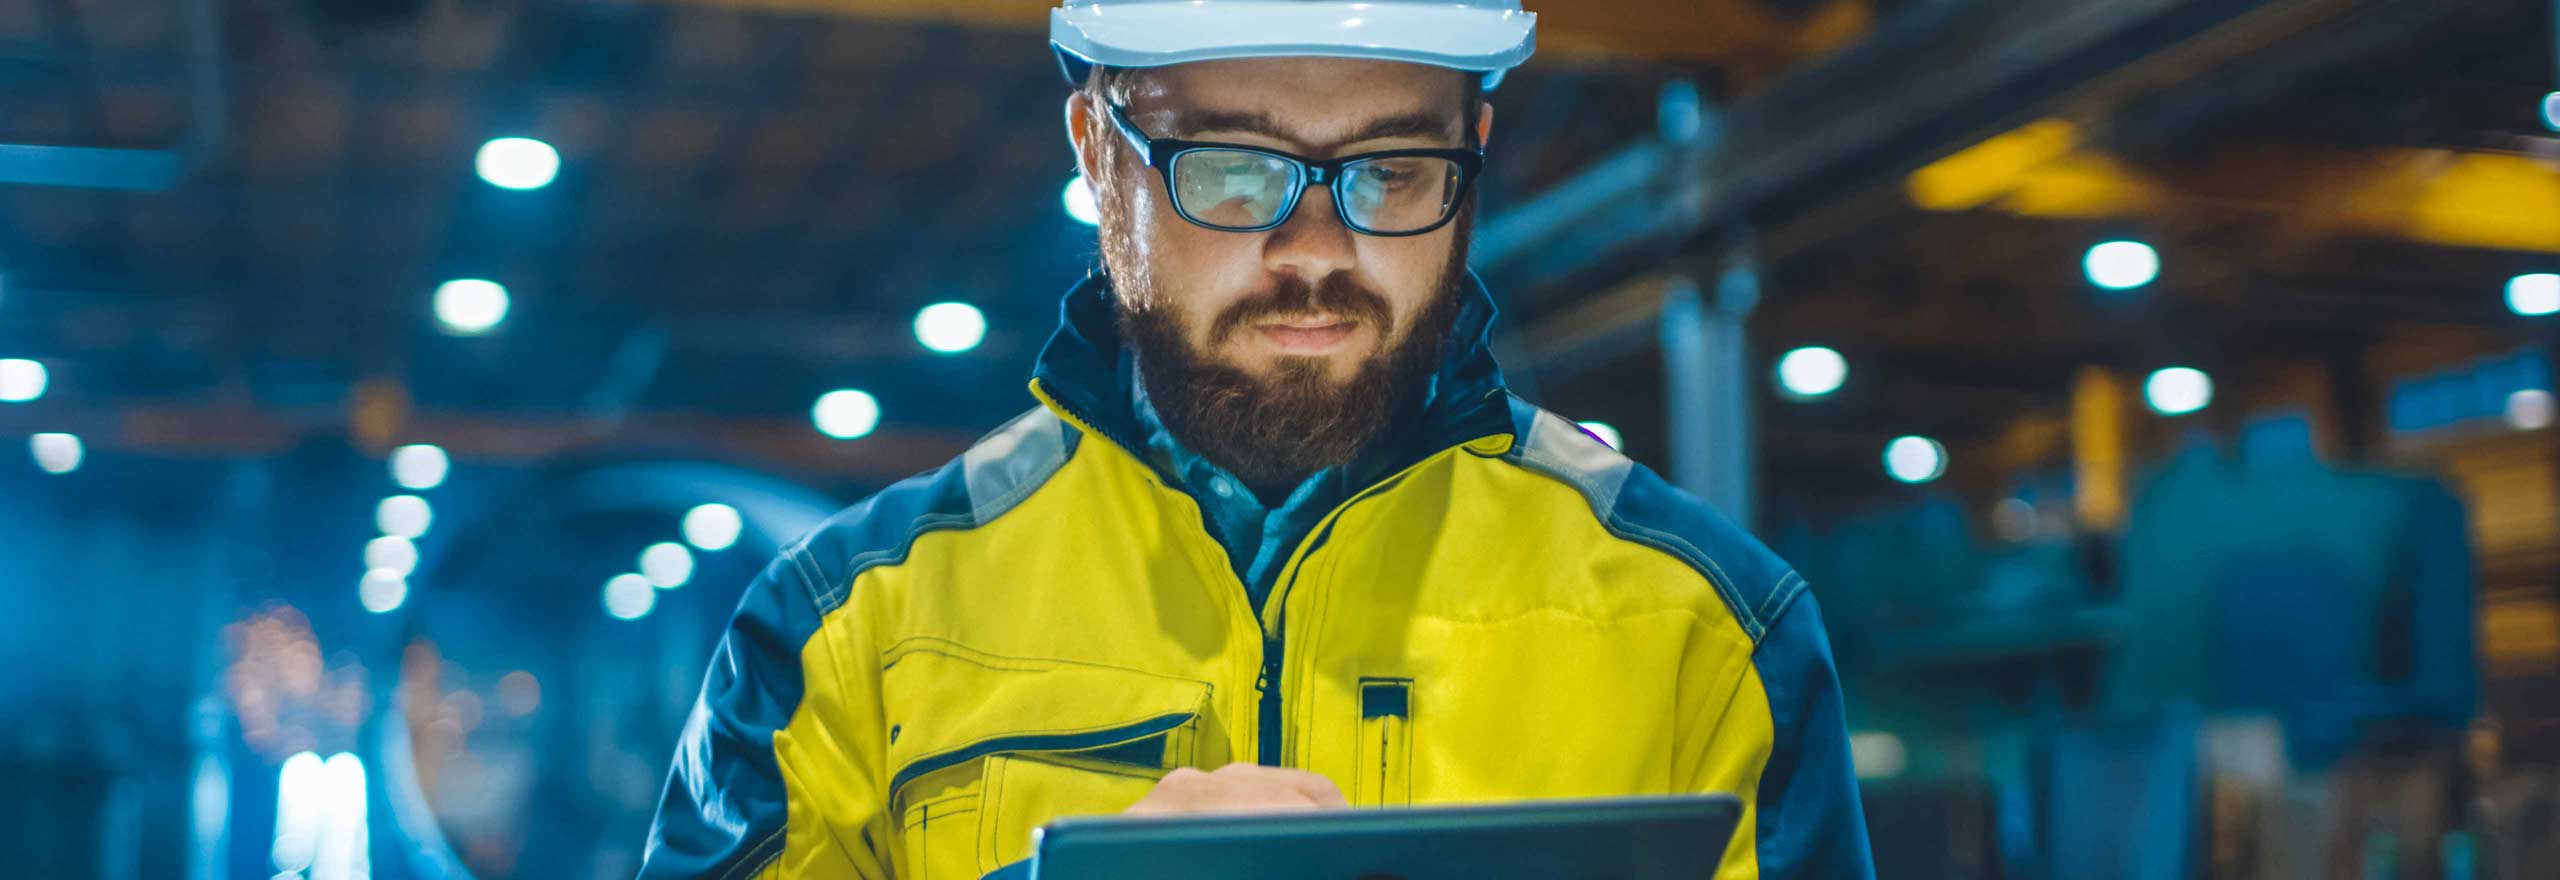 Industrial engineer in hardhat, wearing safety jacket using a touchscreen tablet computer.